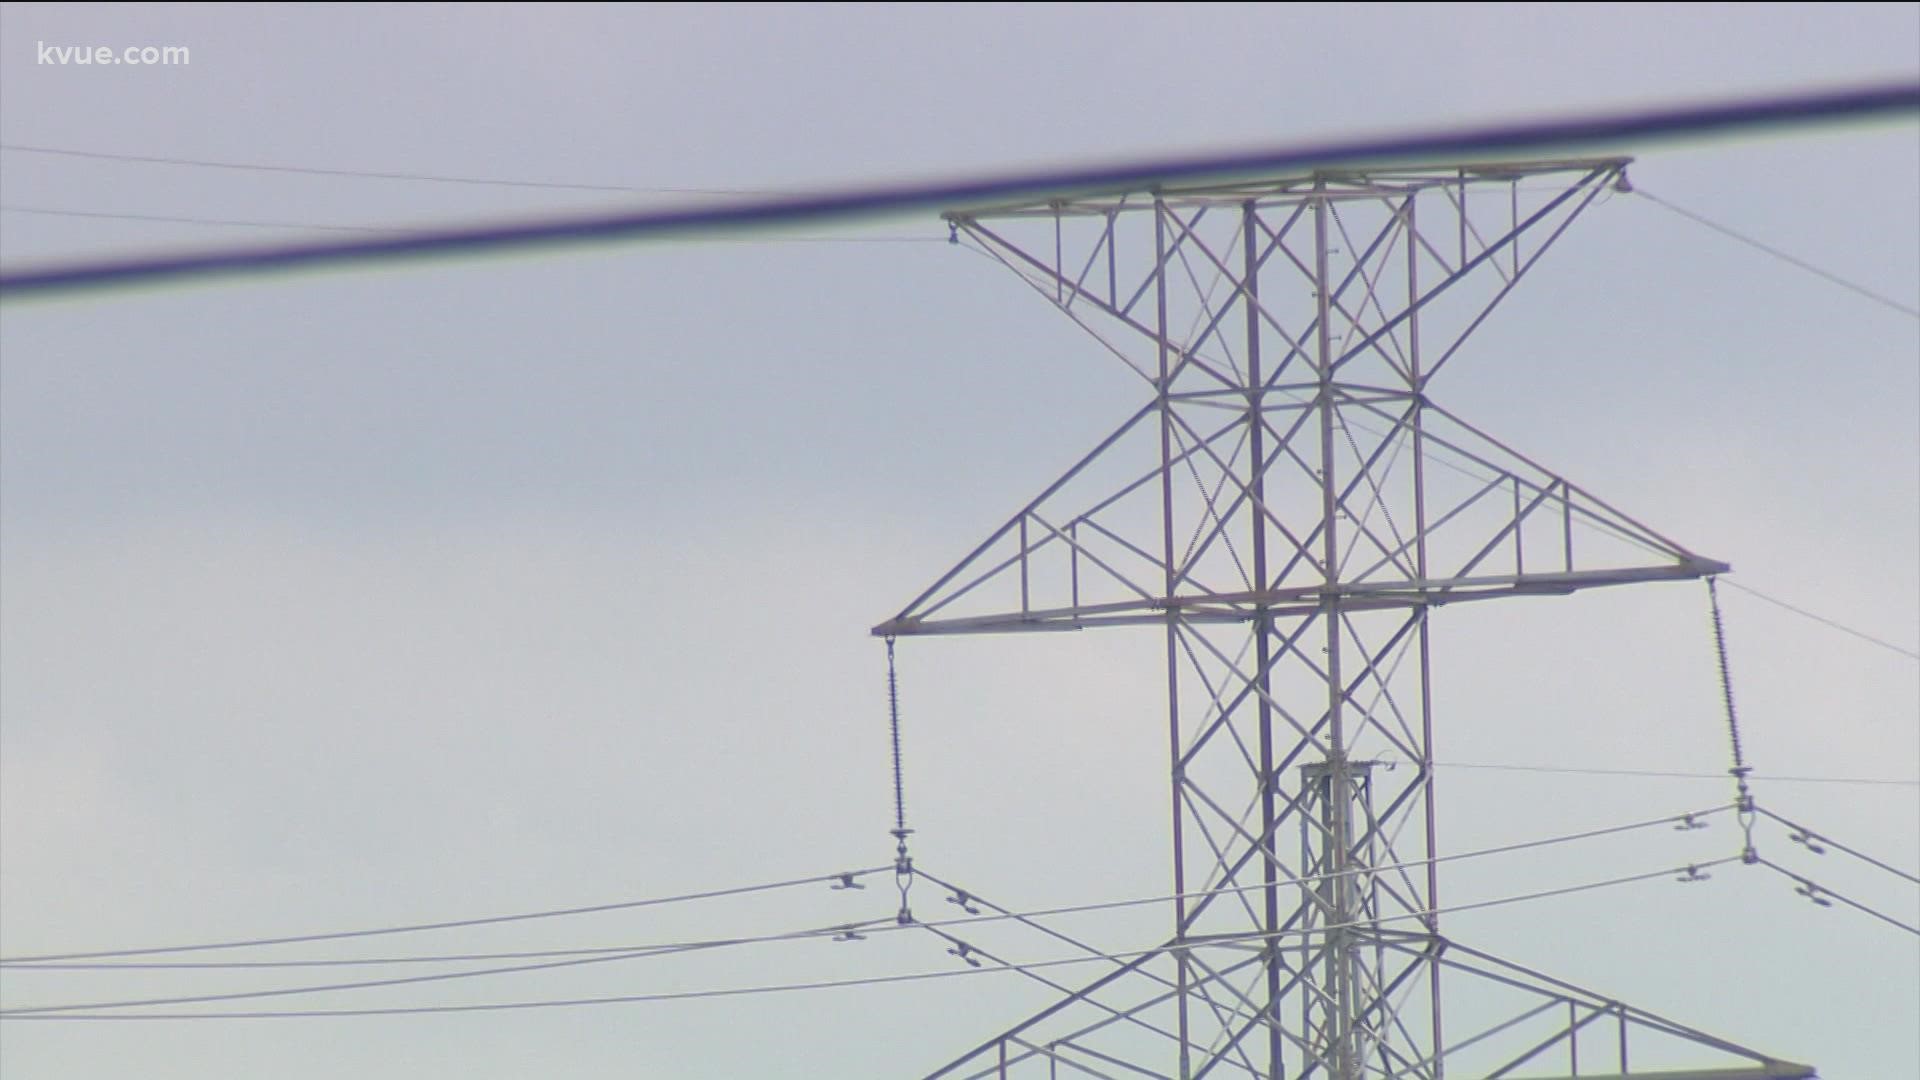 An energy expert spoke with KVUE's Conner Board about different ways consumers can help bring down demand.